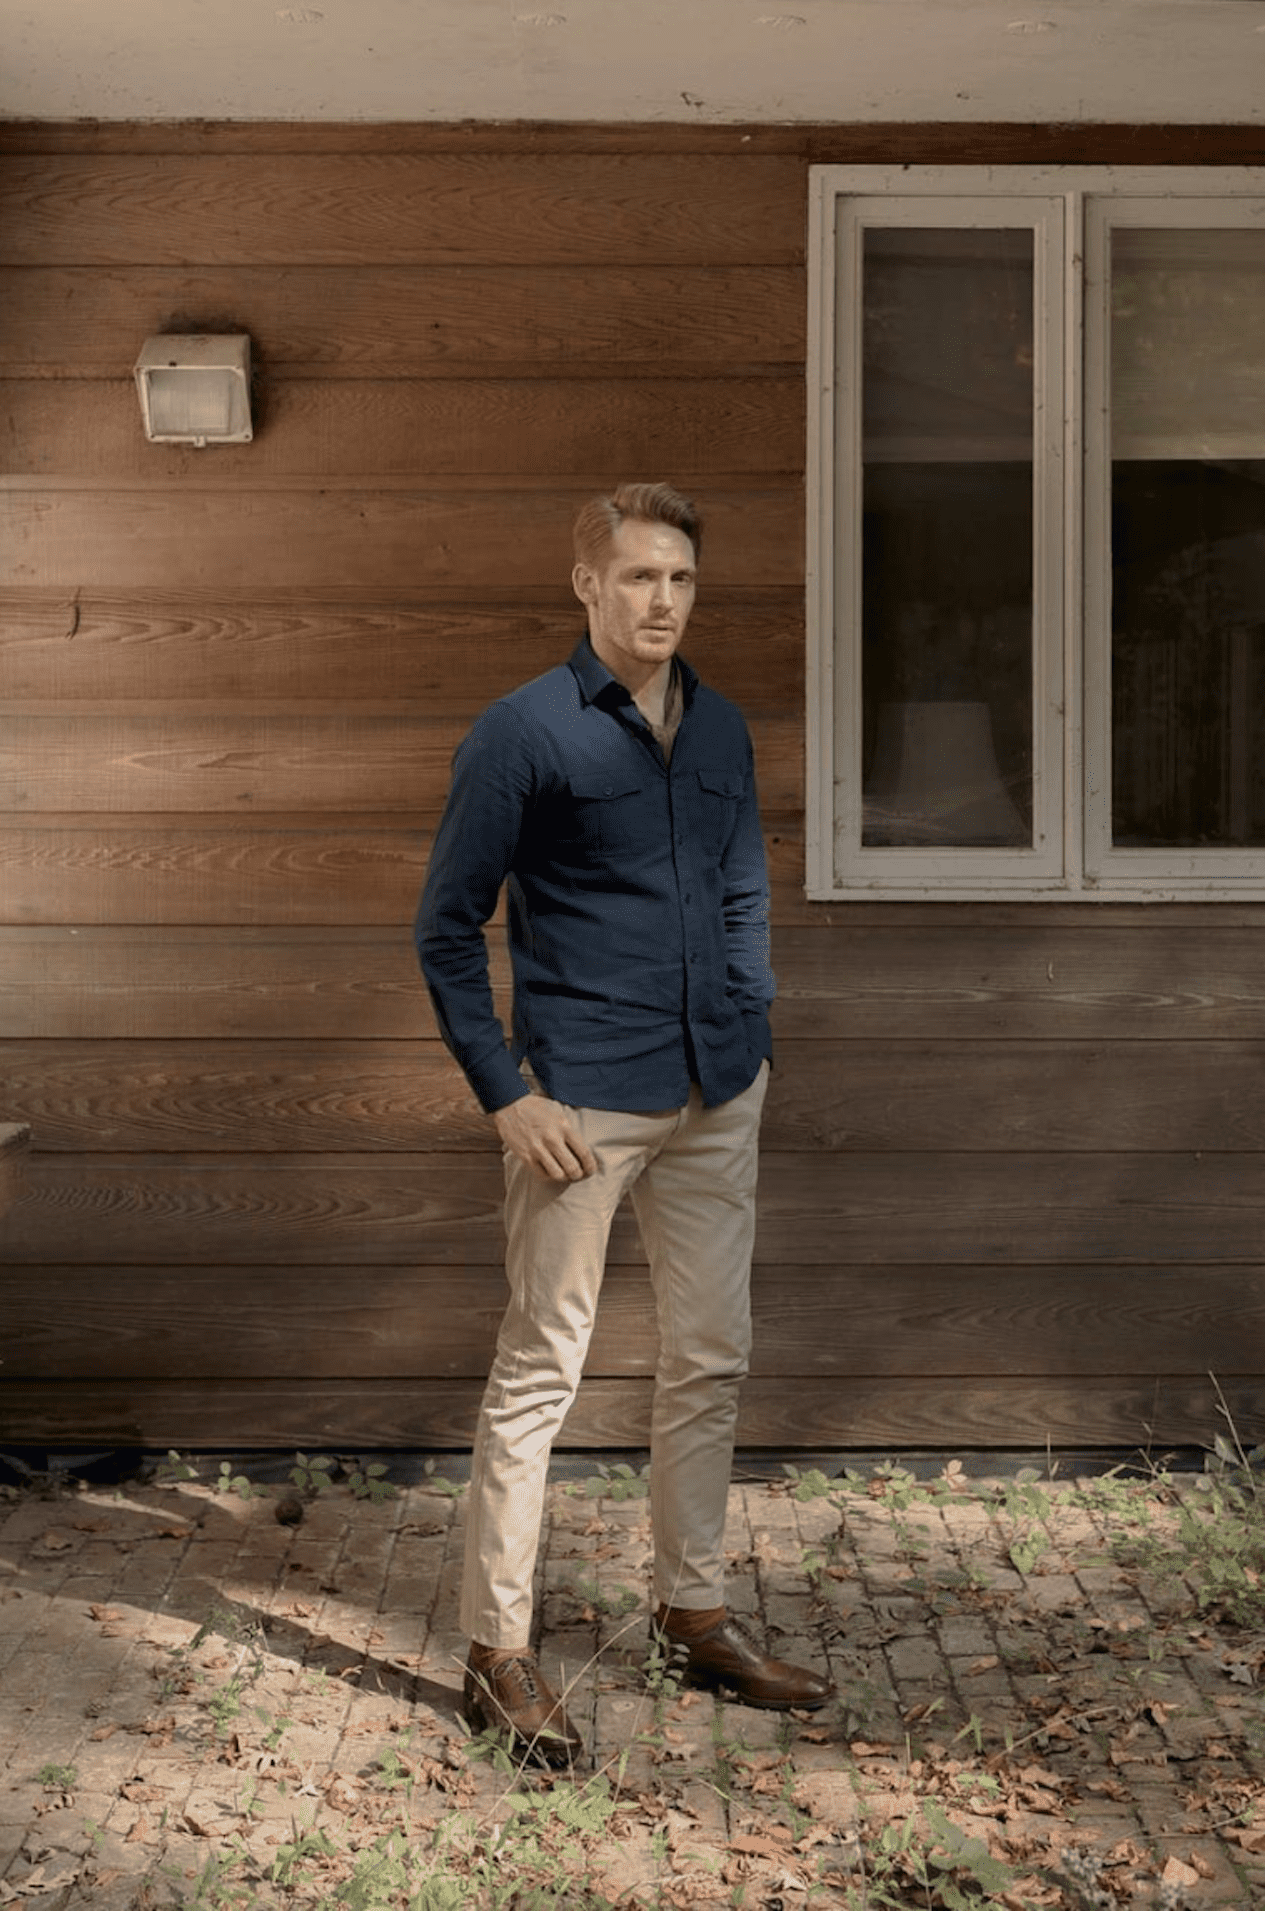 image of a man standing in front of a brown house wearing a blue button up shirt, khaki pants, and brown boots